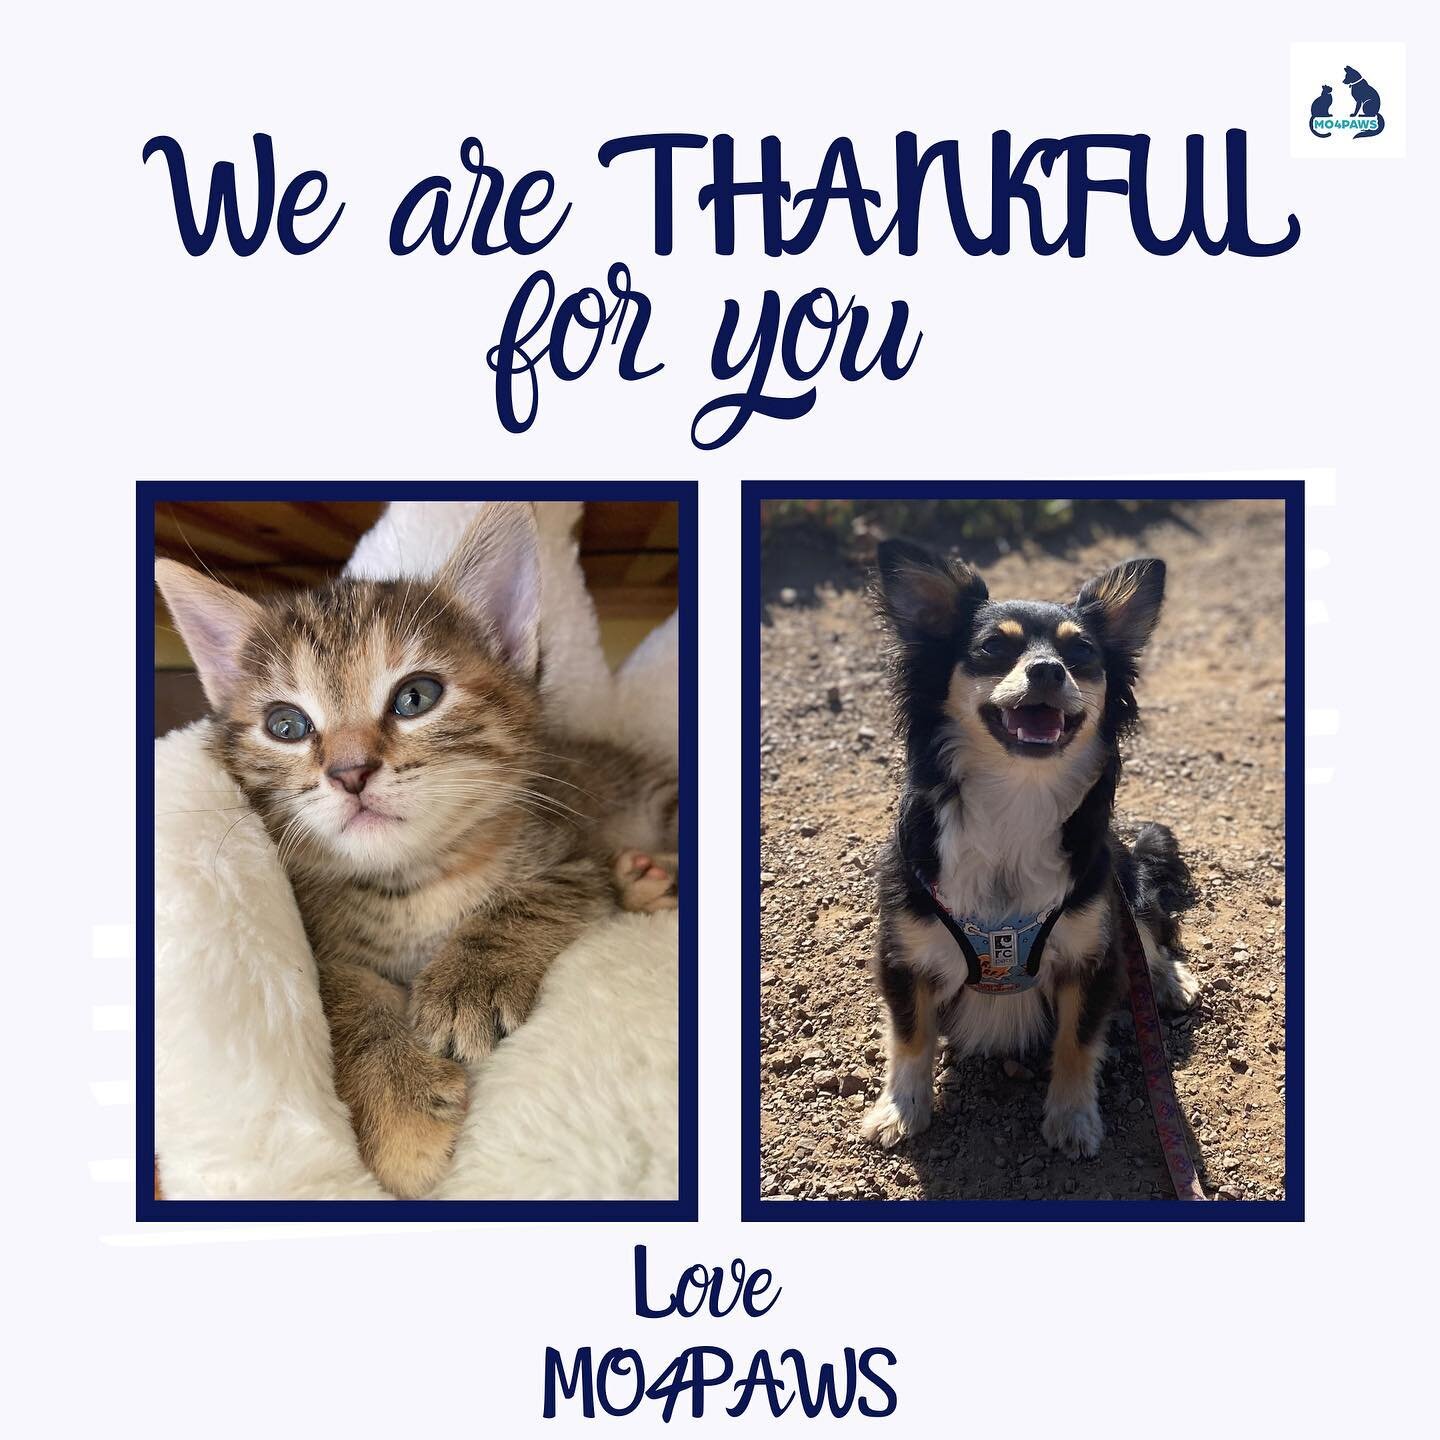 As we near the end of 2021, we&rsquo;re giving thanks for the incredible support that brought smiles to so many pets and families this year.
.
MO4PAWS would like to share our gratitude for the ones we love and have in our lives-two and four legged. H